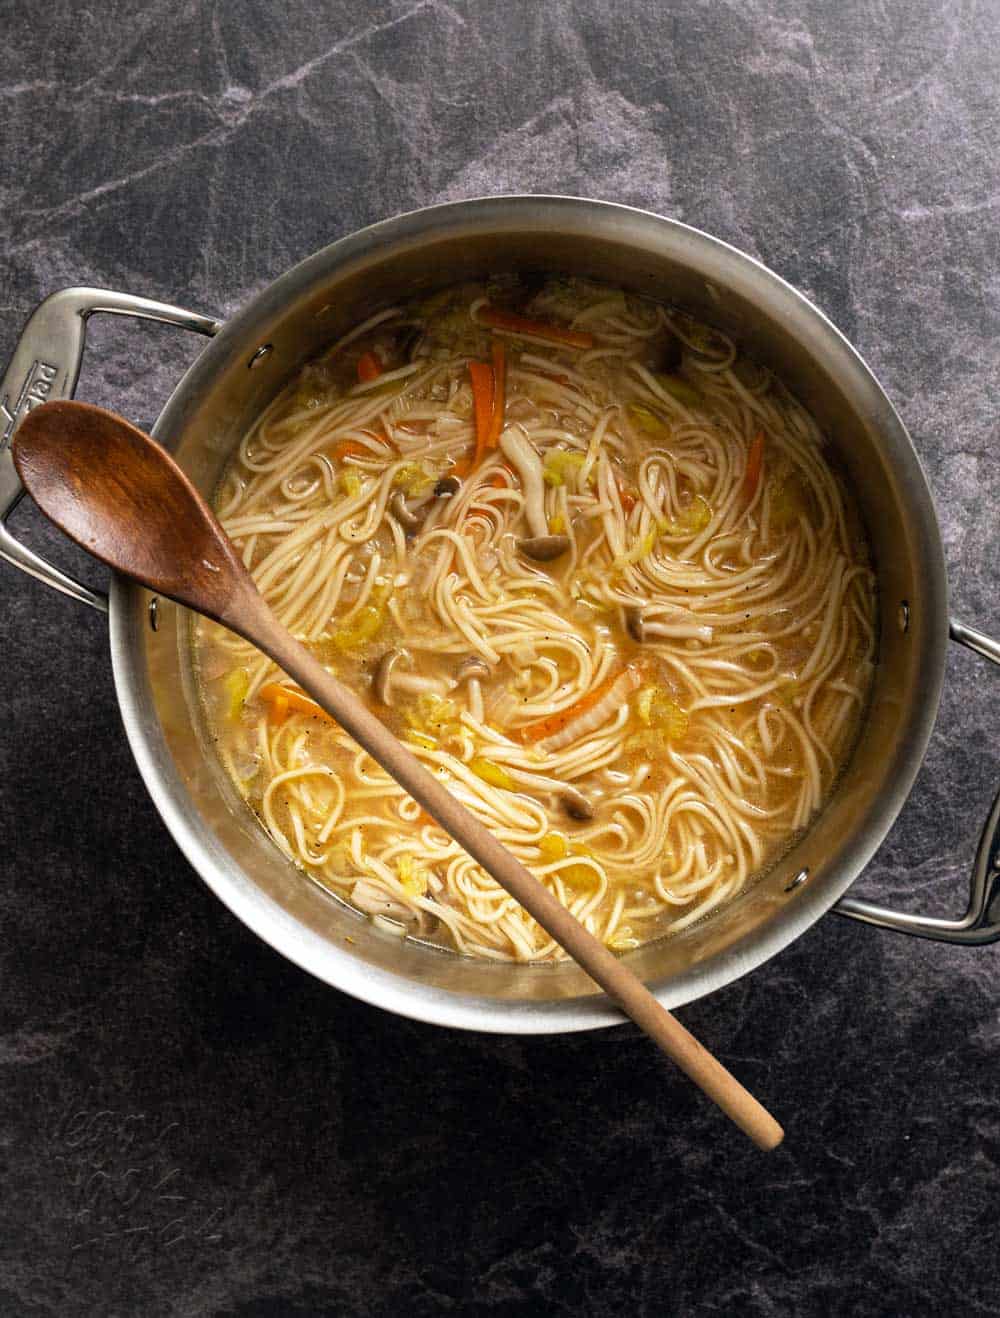 Noodle soup in a large metal pot with wooden spoon